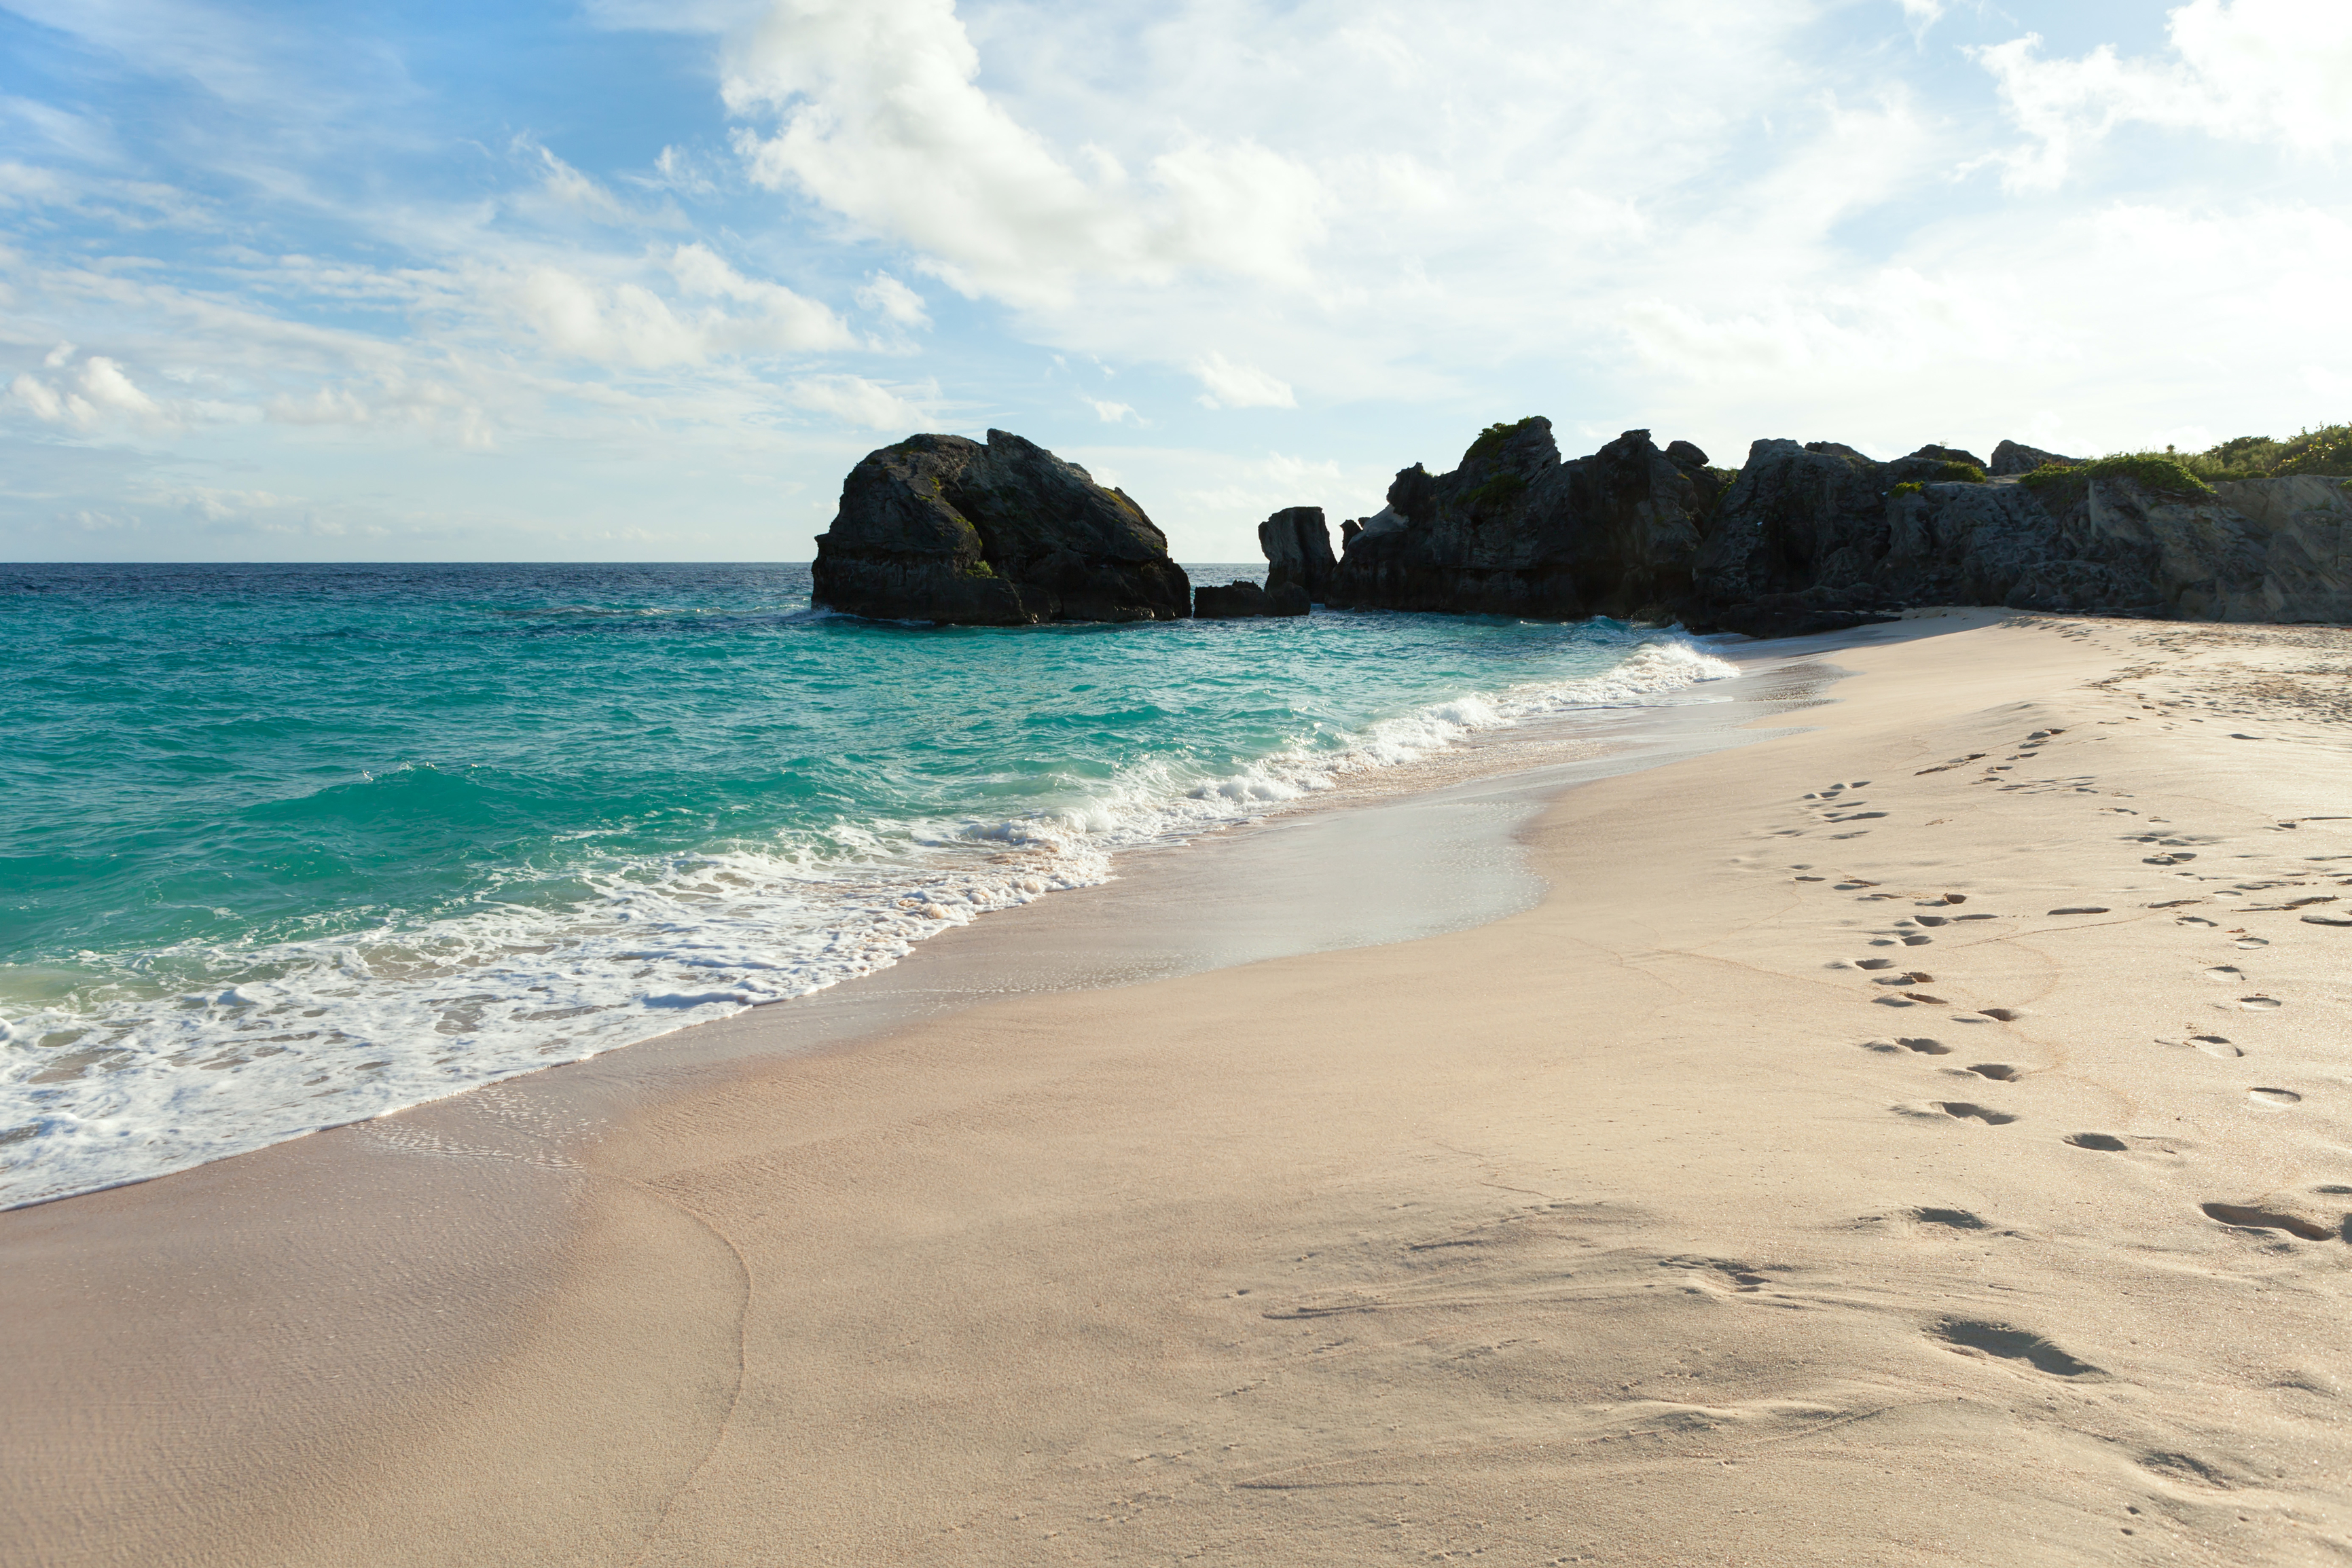 Flights to Bermuda in the $200s to $300s round-trip!